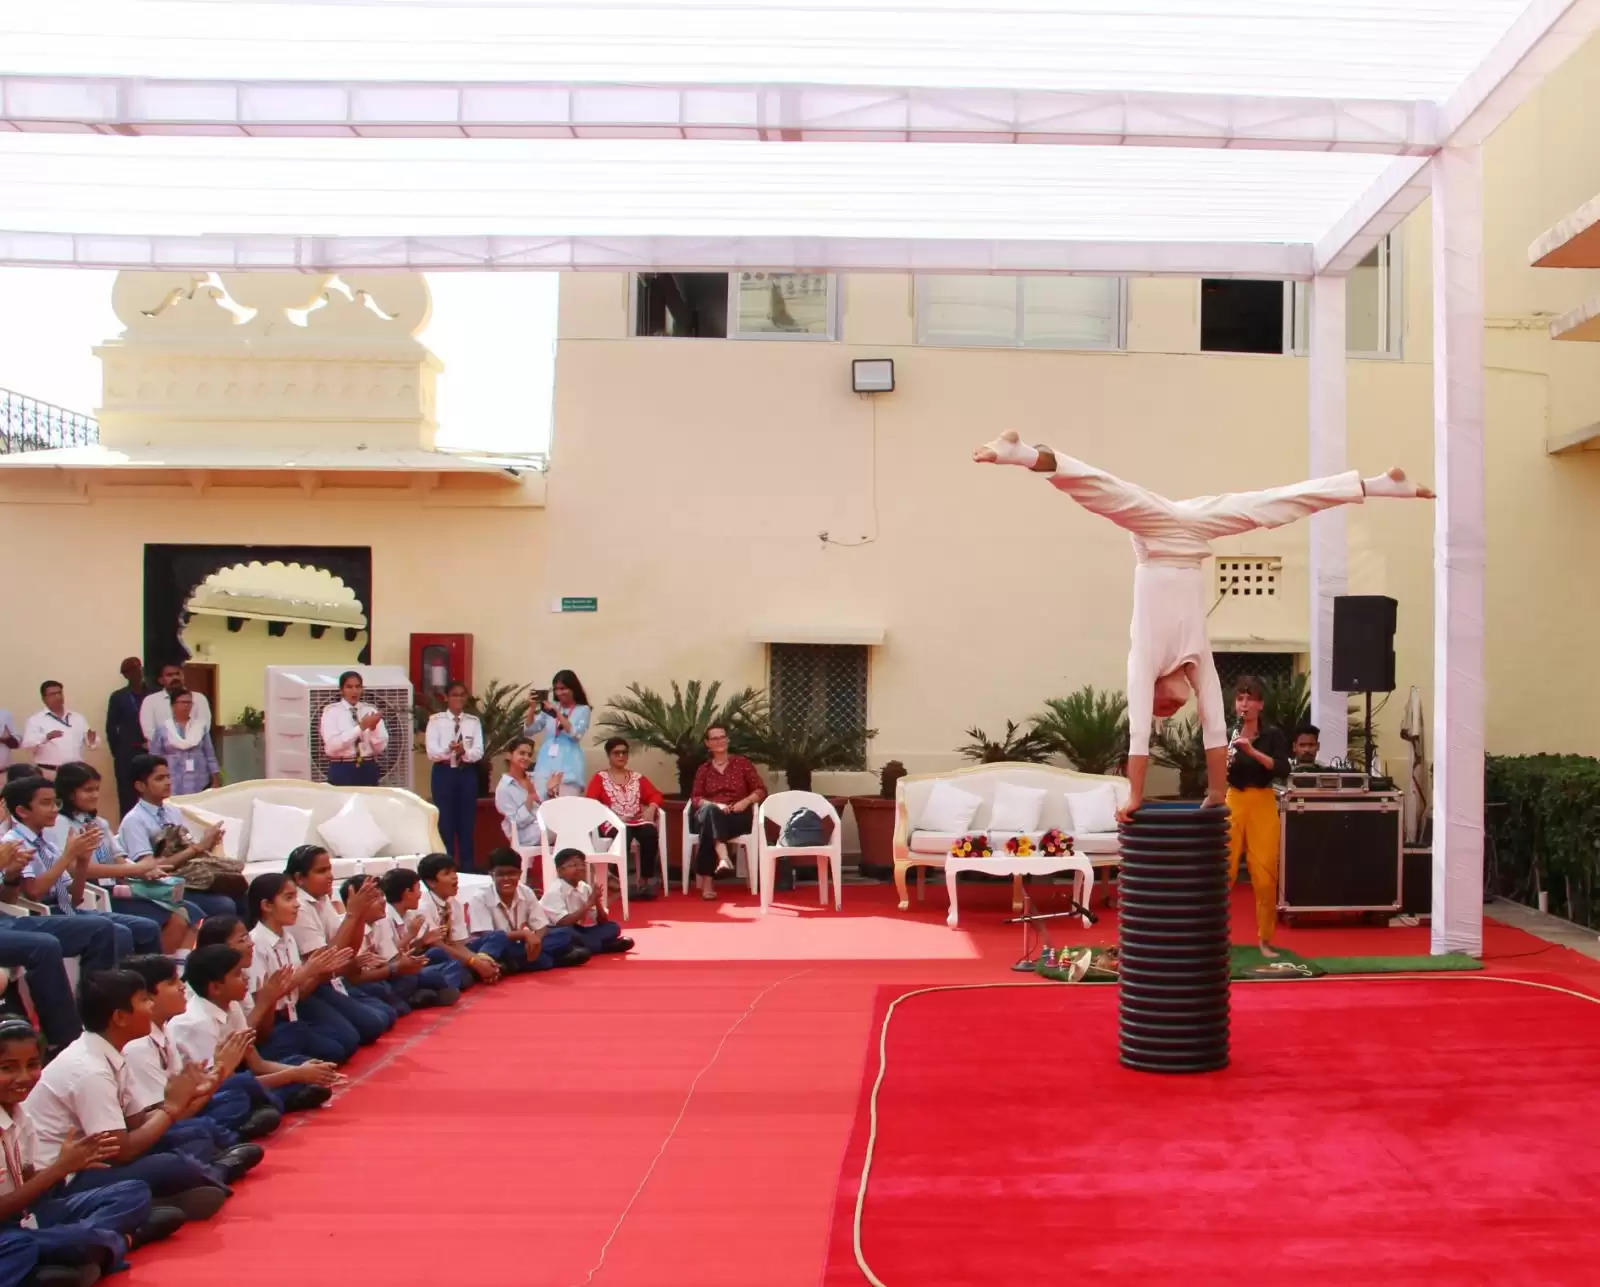 Alliance Francaise de Jaipur conducts French Culture Week in Udaipur,  Gillou Gilles Charles-Messance seasoned Acrobat, painting at MMPS